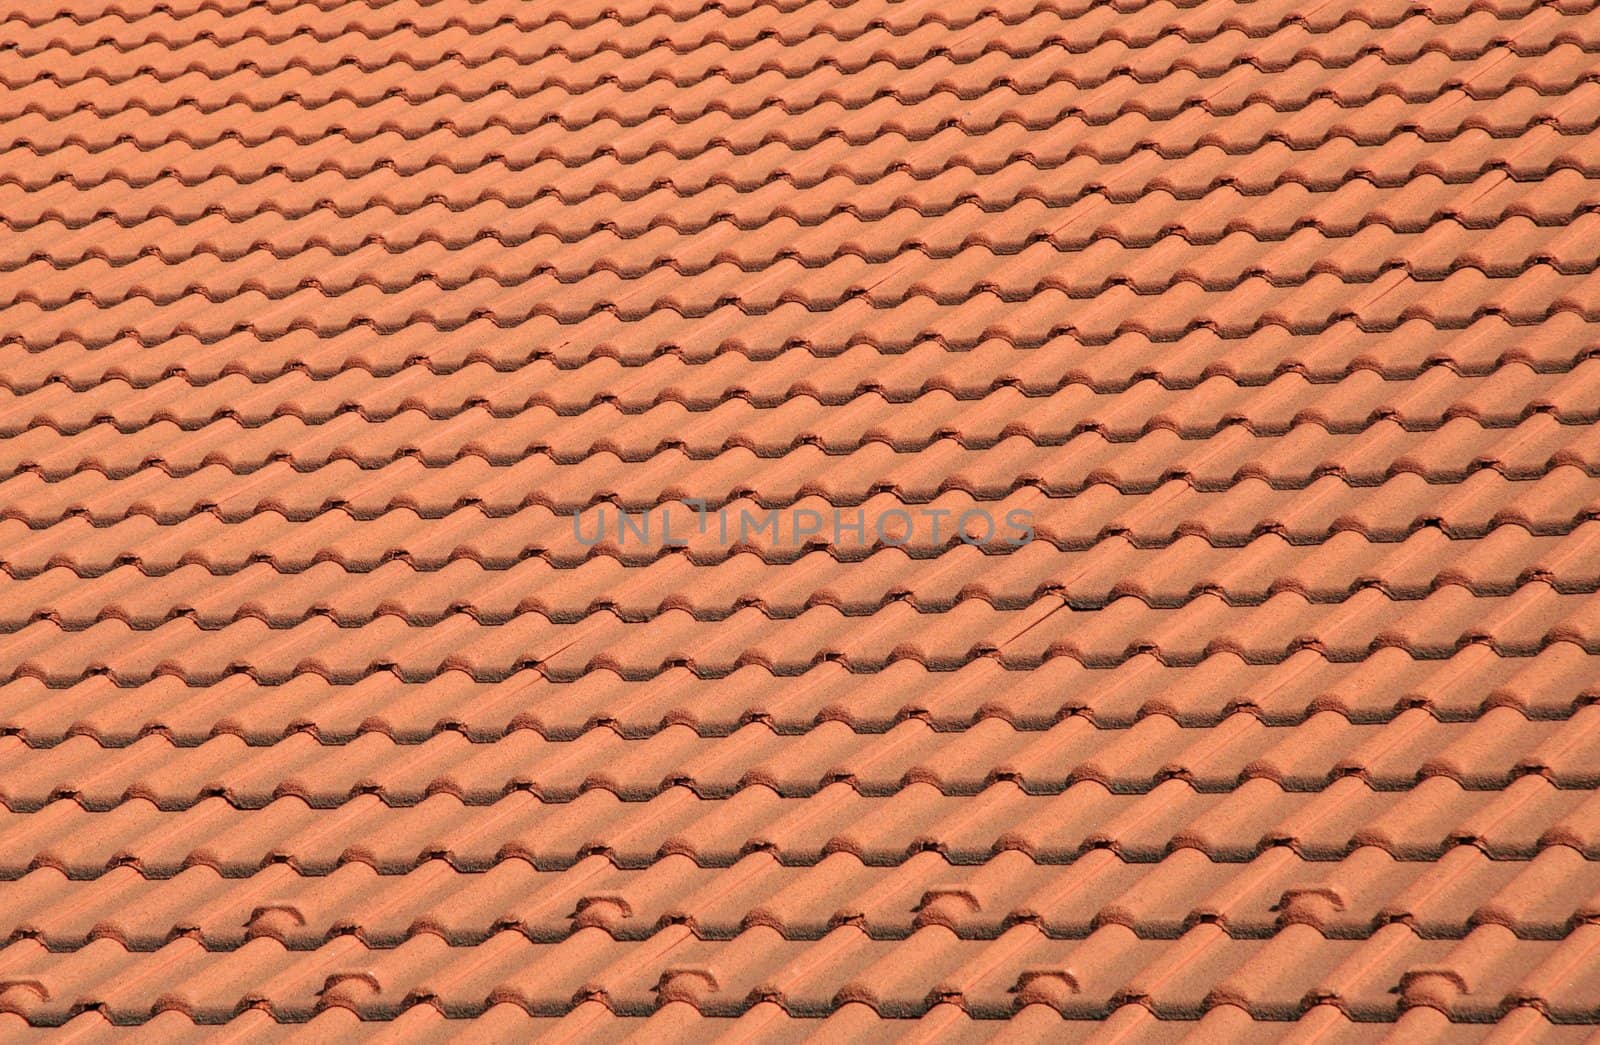 detail photo - roof made of small orange shingles, 